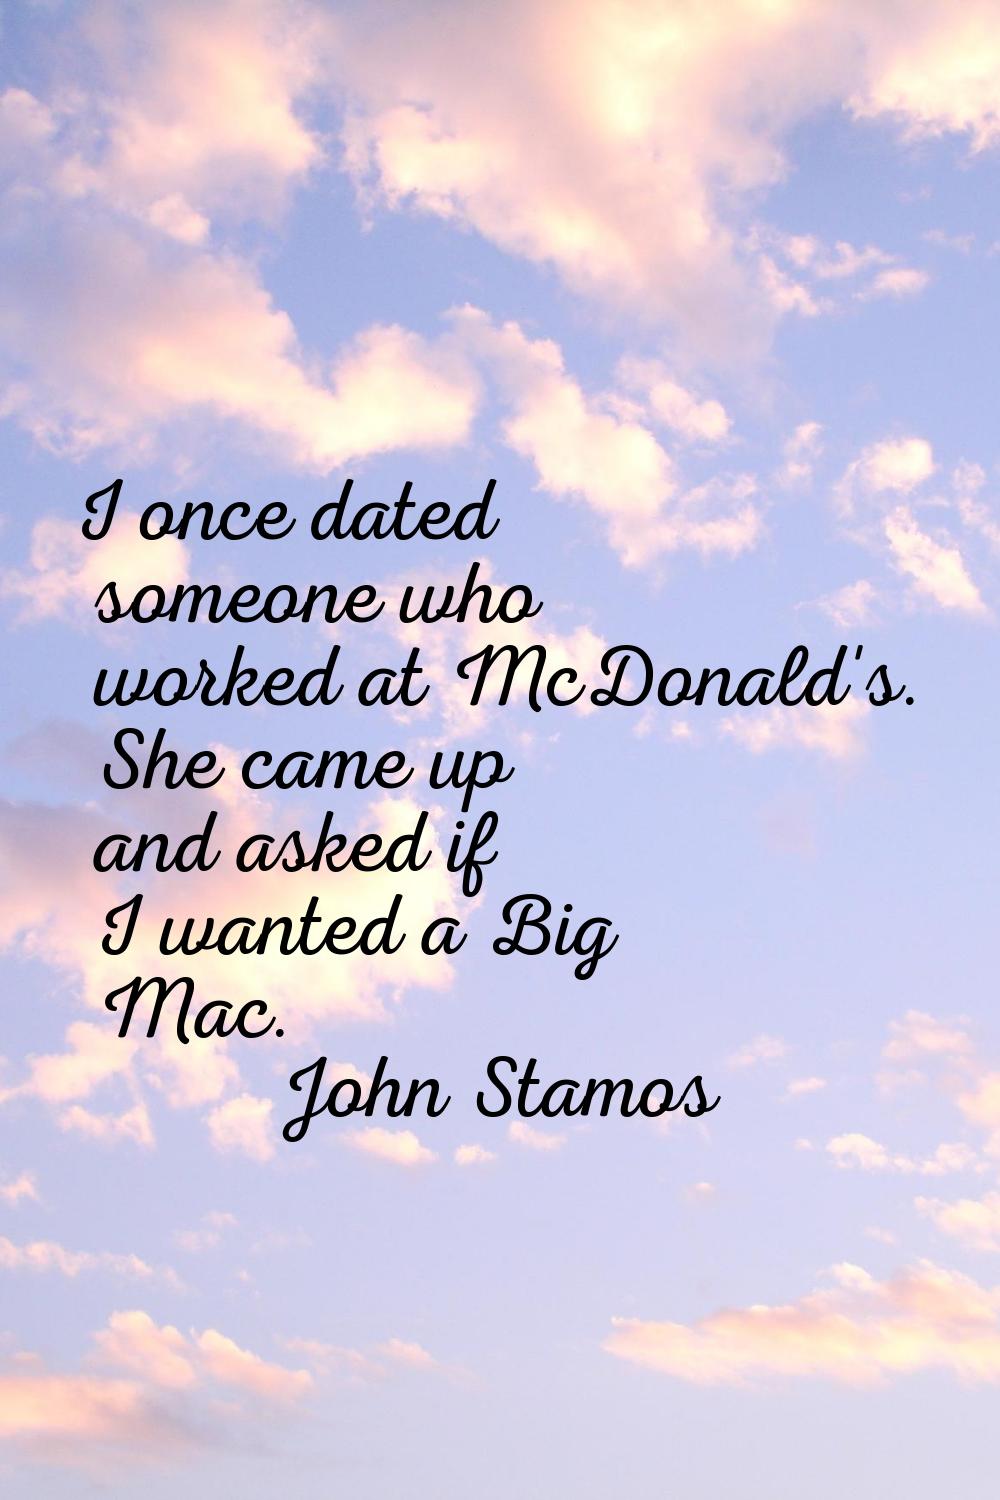 I once dated someone who worked at McDonald's. She came up and asked if I wanted a Big Mac.